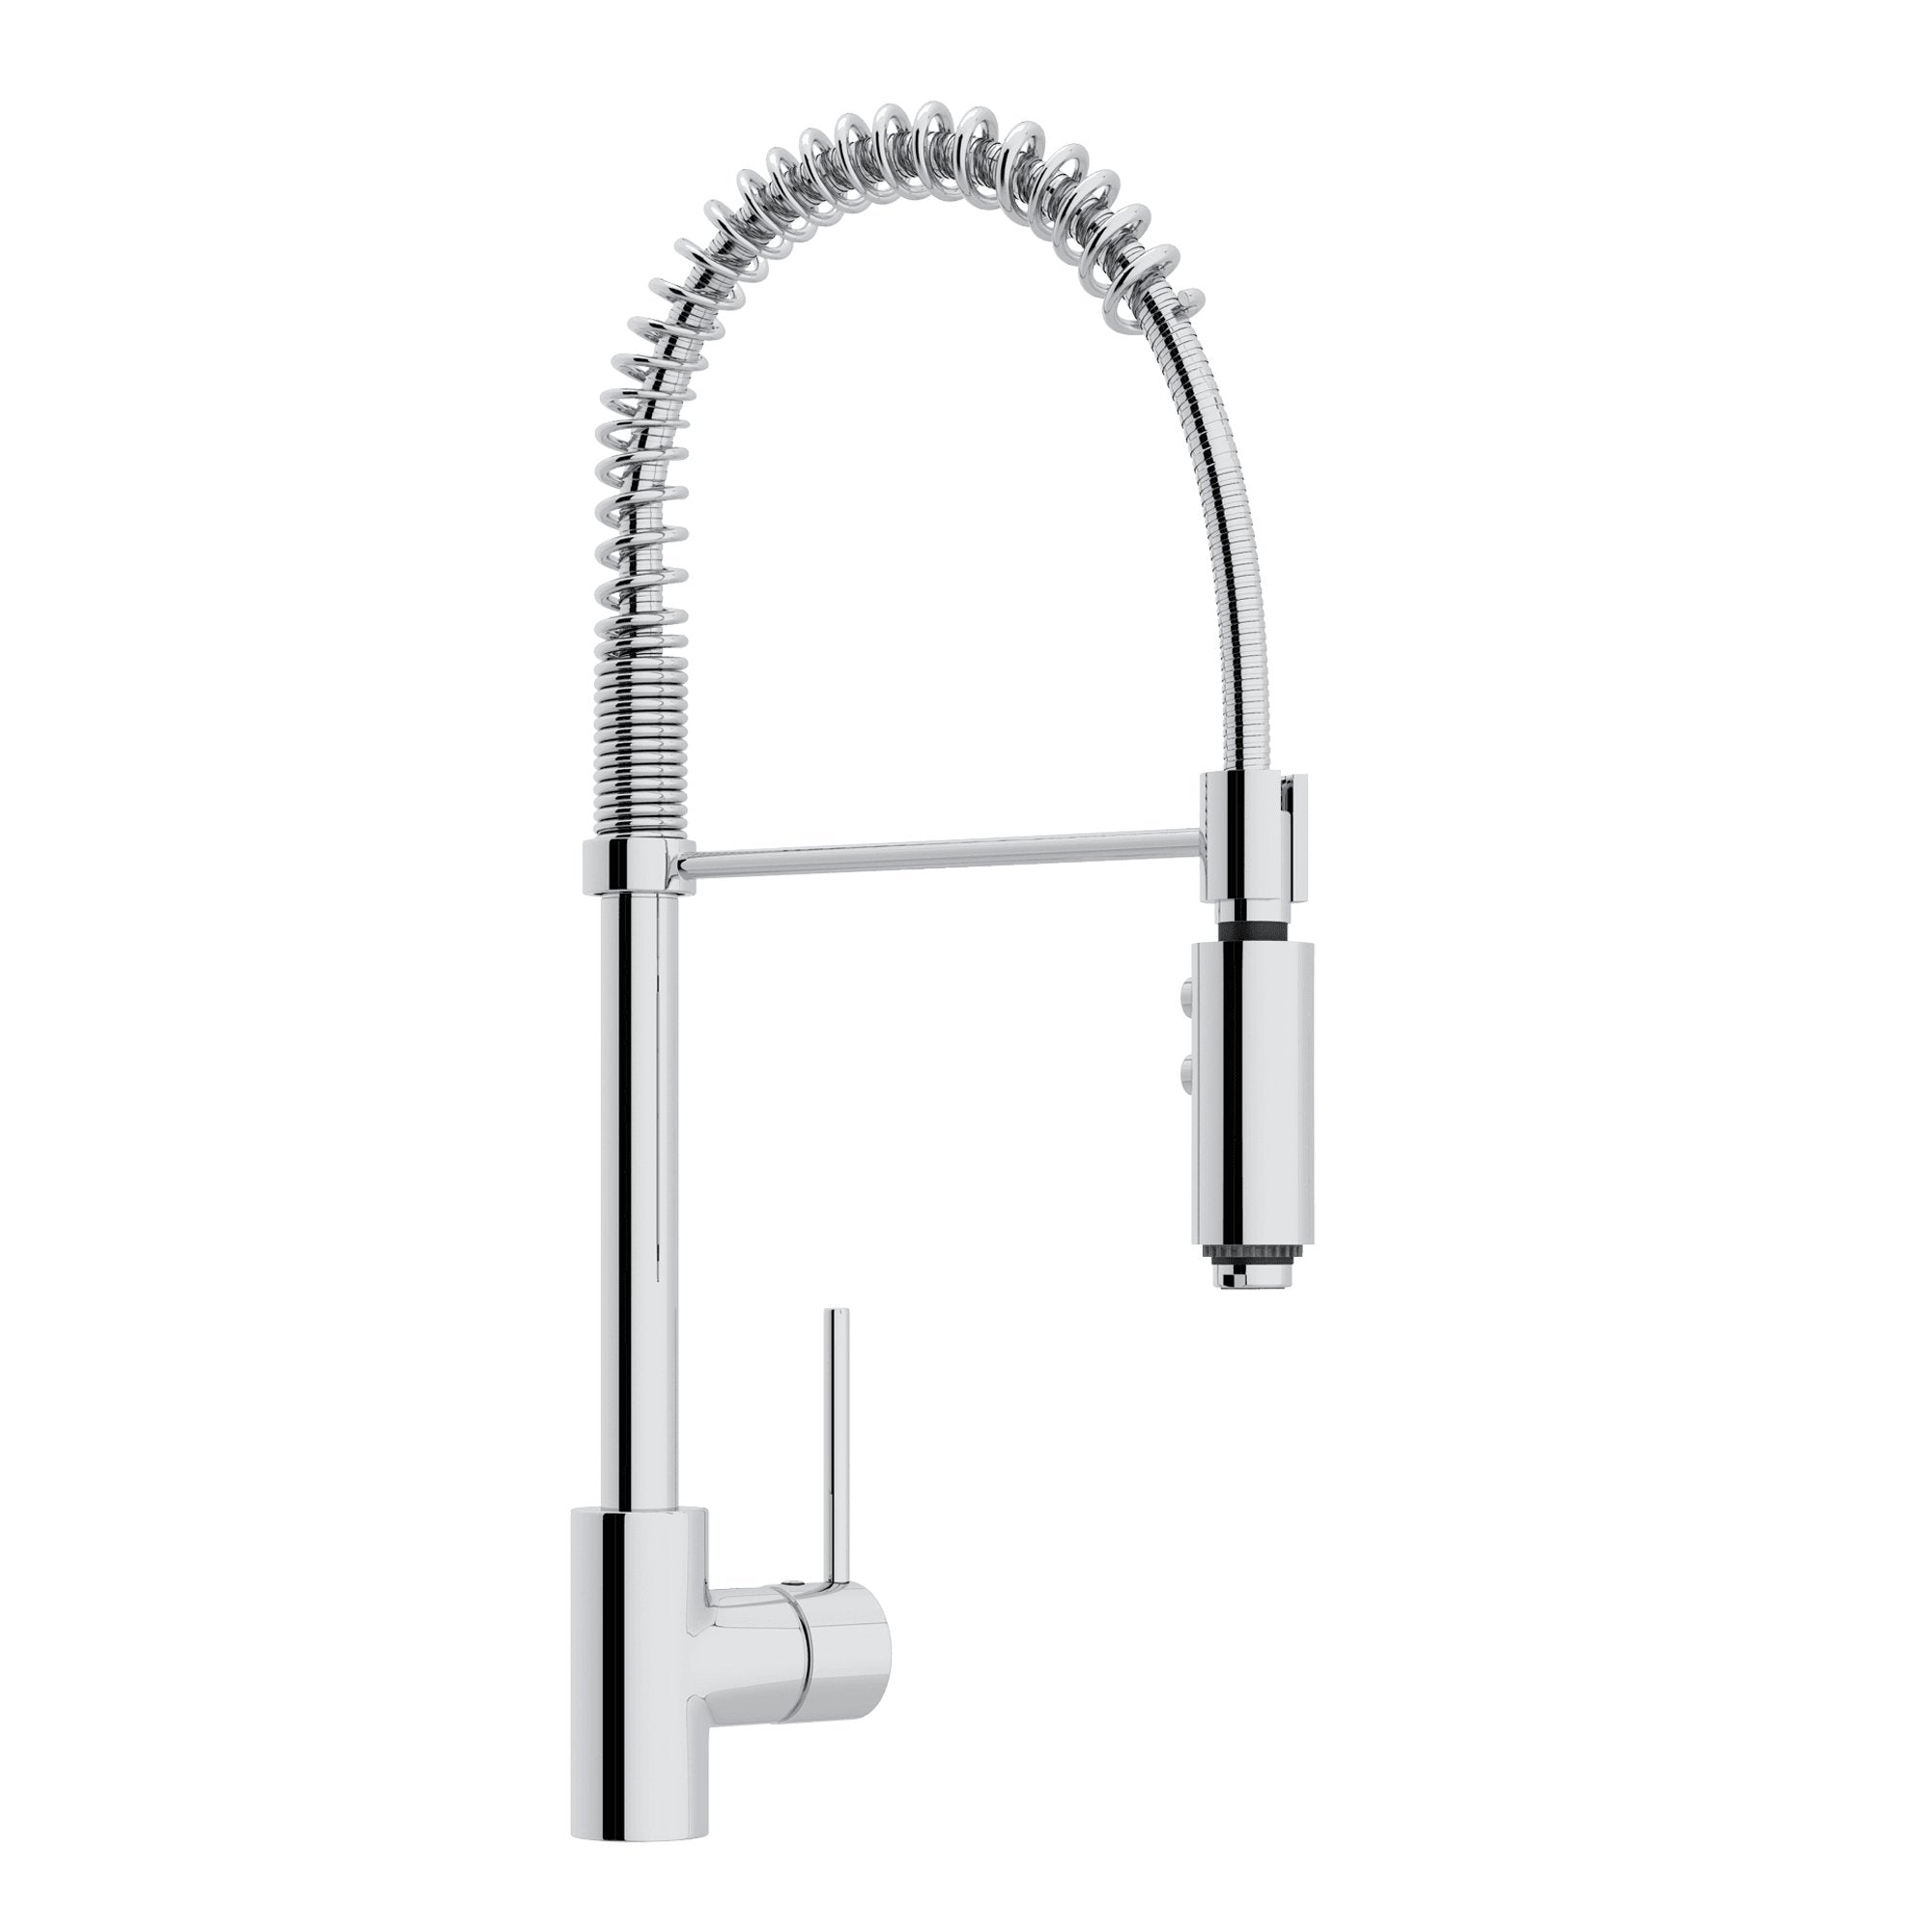 ROHL LS64 Pirellone Tall Pull-Down Kitchen Faucet